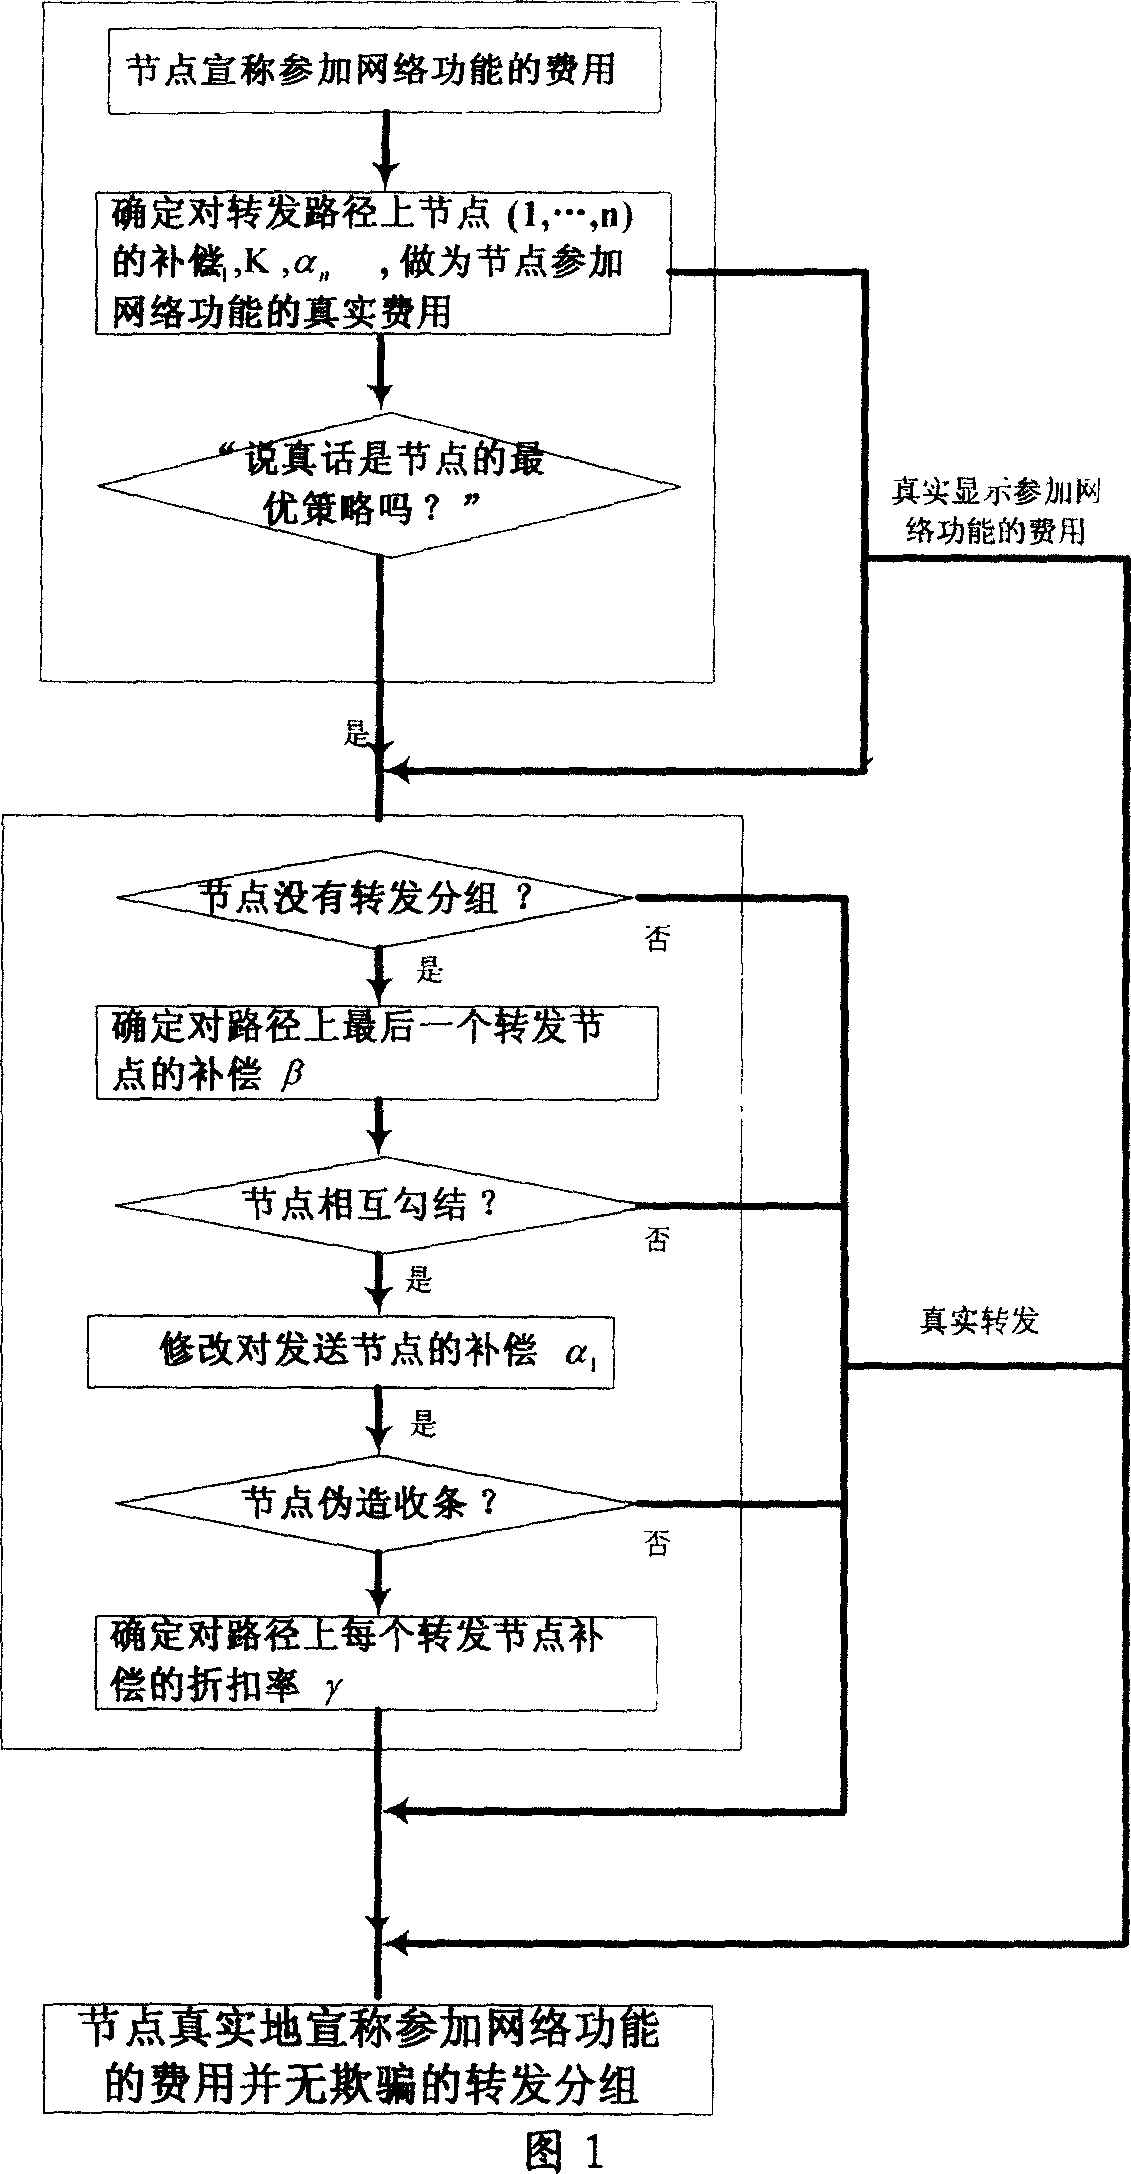 Fee-based route and relay method for wireless self-organized network